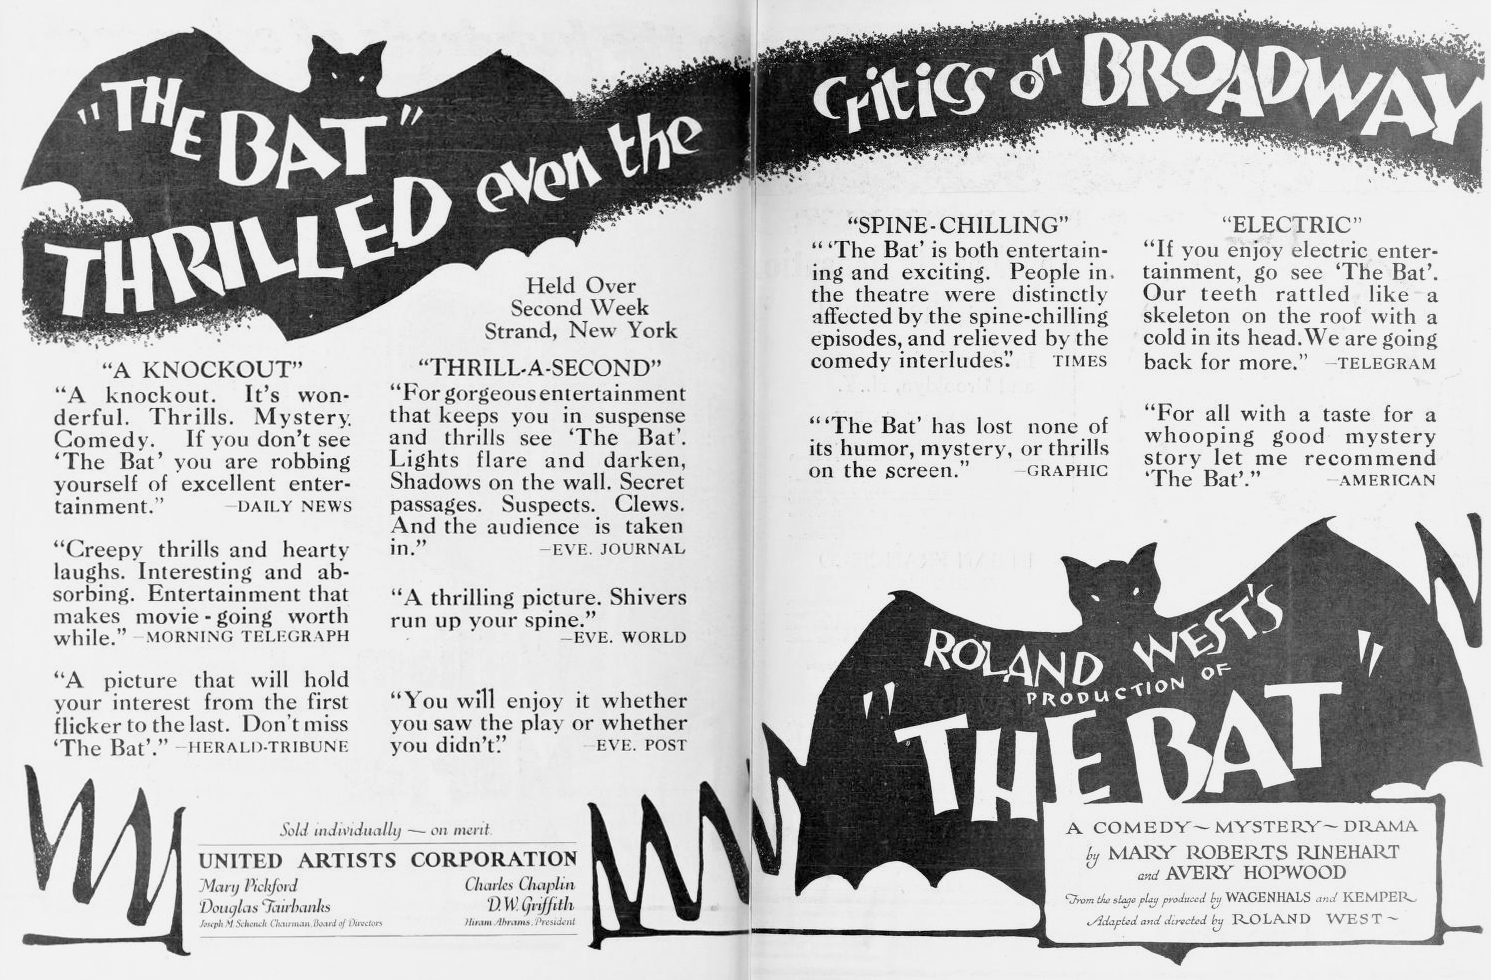 Historical trade ad for THE BAT (1926)